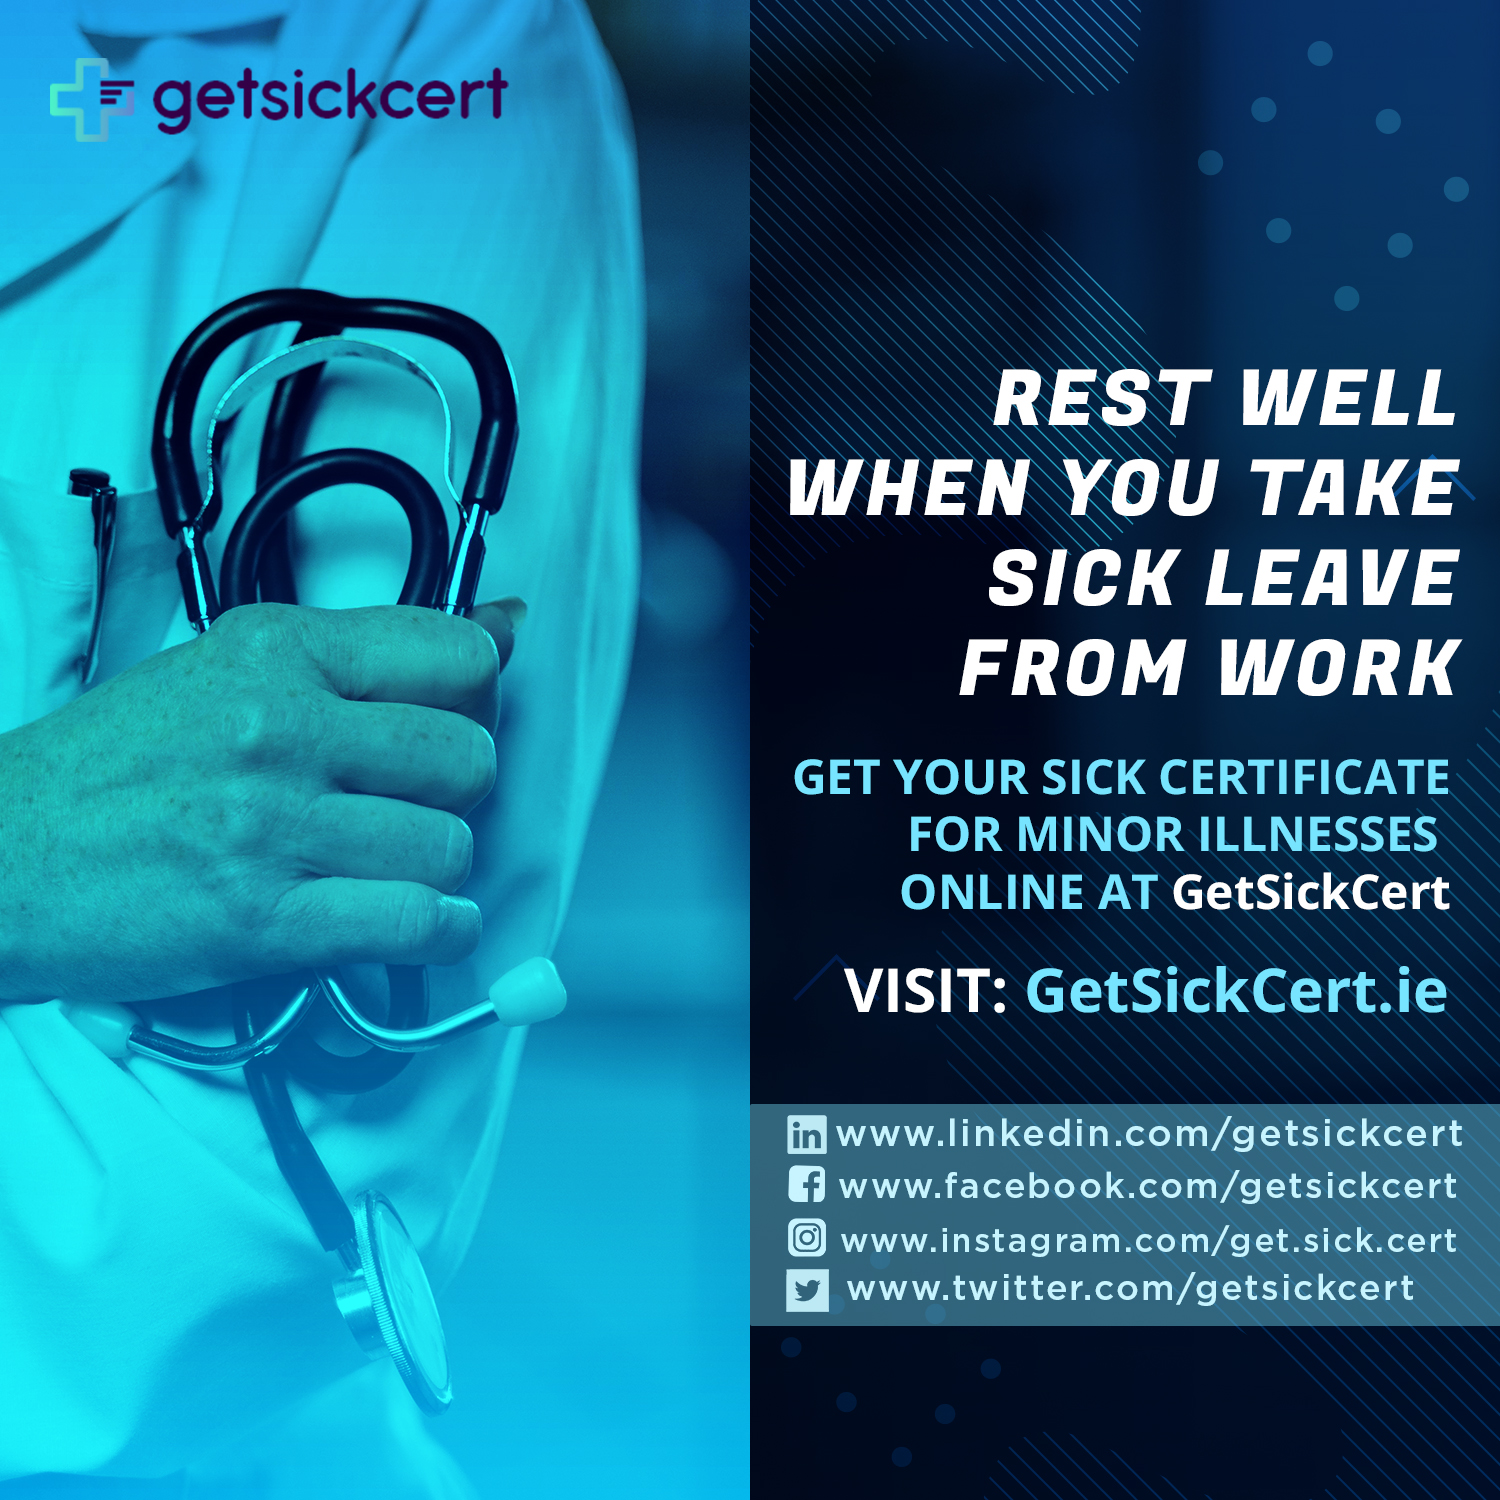 Getsickcert Online Certificates Are Now Available Nationwide in Ireland